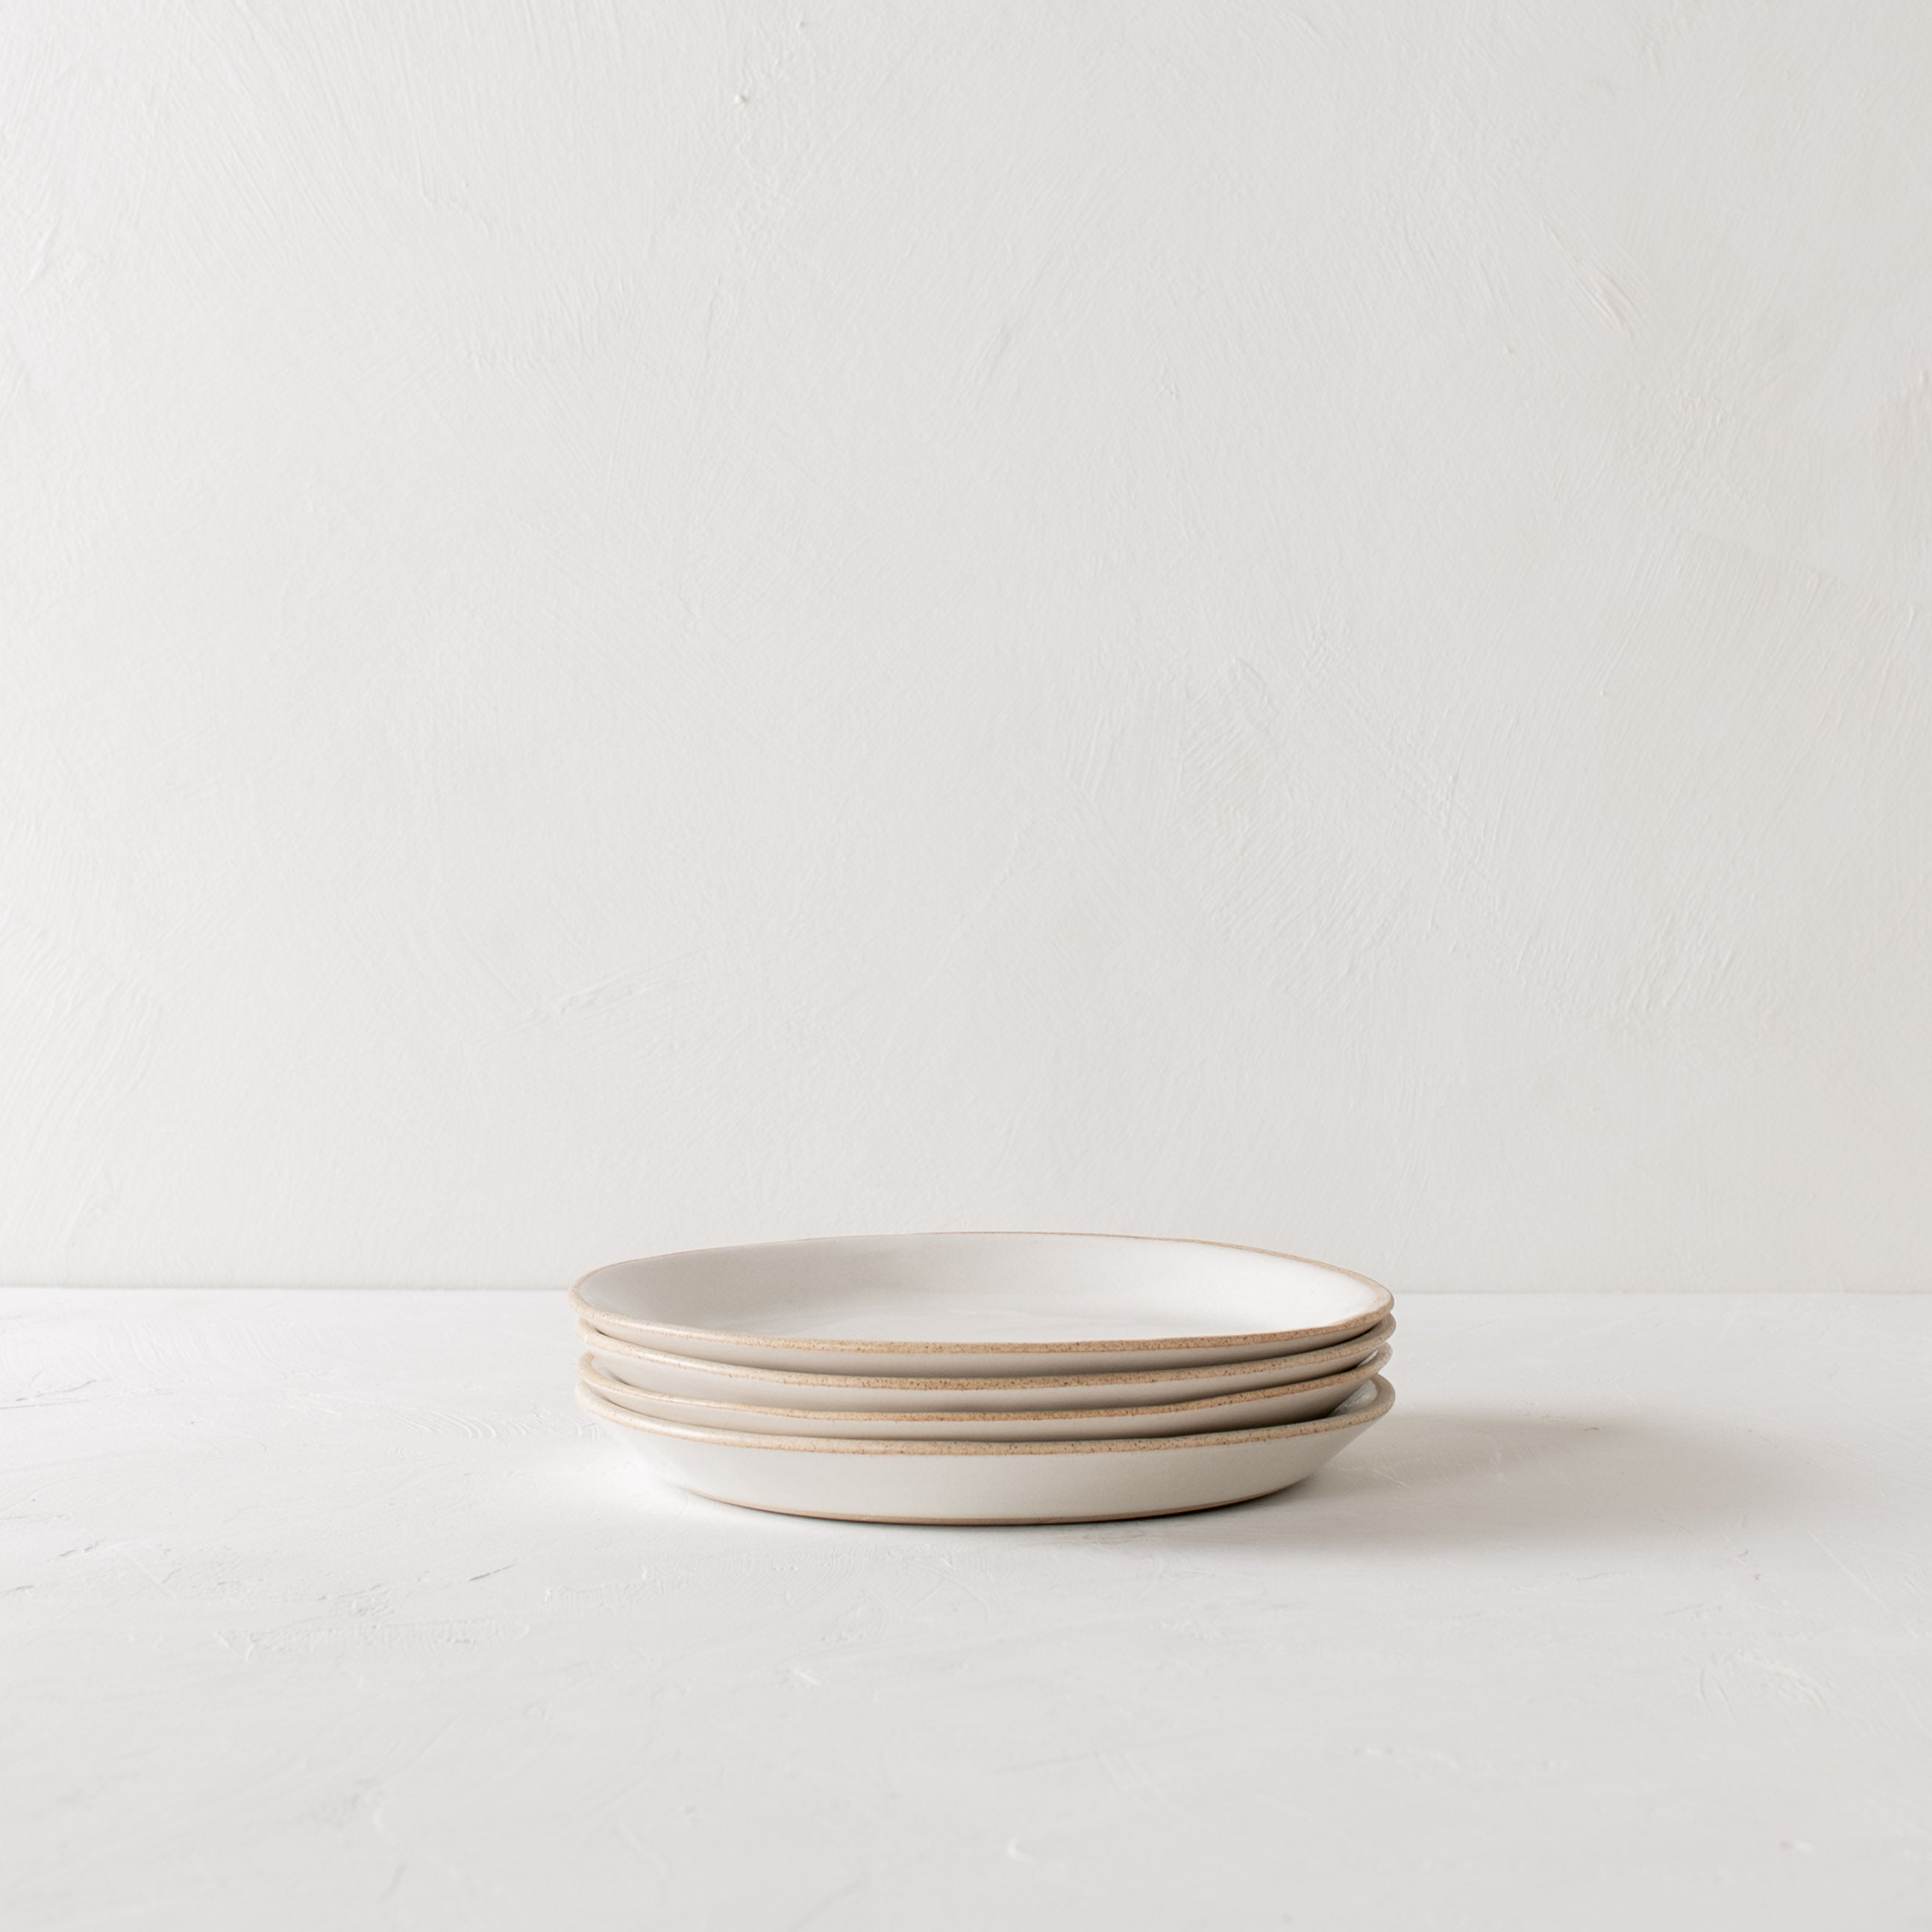 Minimal white ceramic plates stacked, four salad plates stacked. Handmade ceramic plates, designed and sold by Convivial Production, Kansas City ceramics.